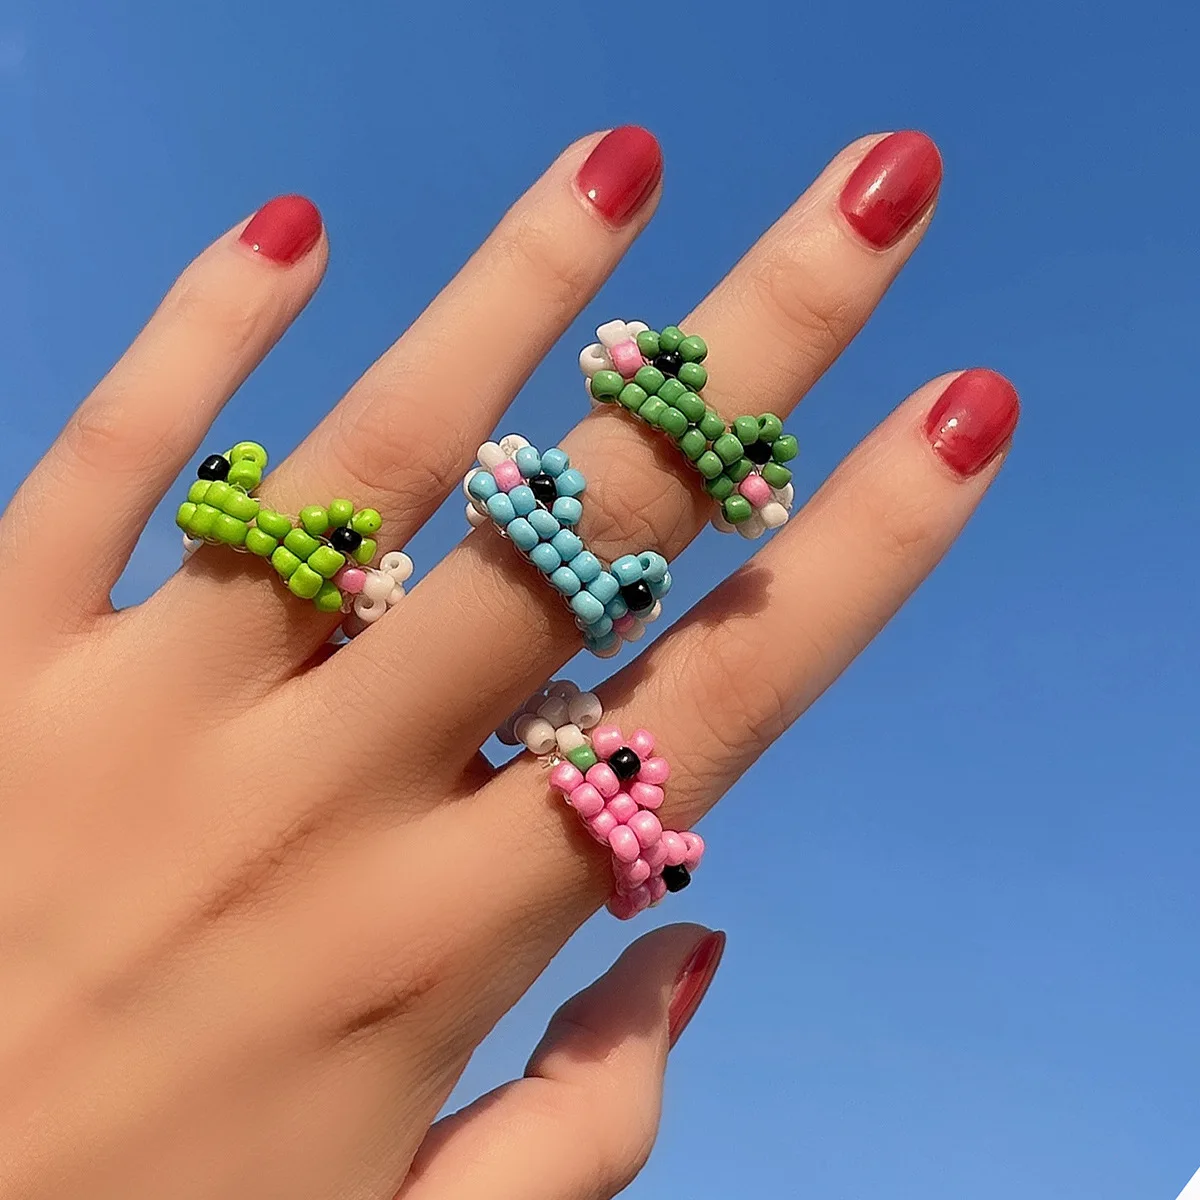 

2021 Vintage Frog Rings Bohemia Handmade Colorful Beads Ring for Women Men Friendship Ring Jewelry Gift